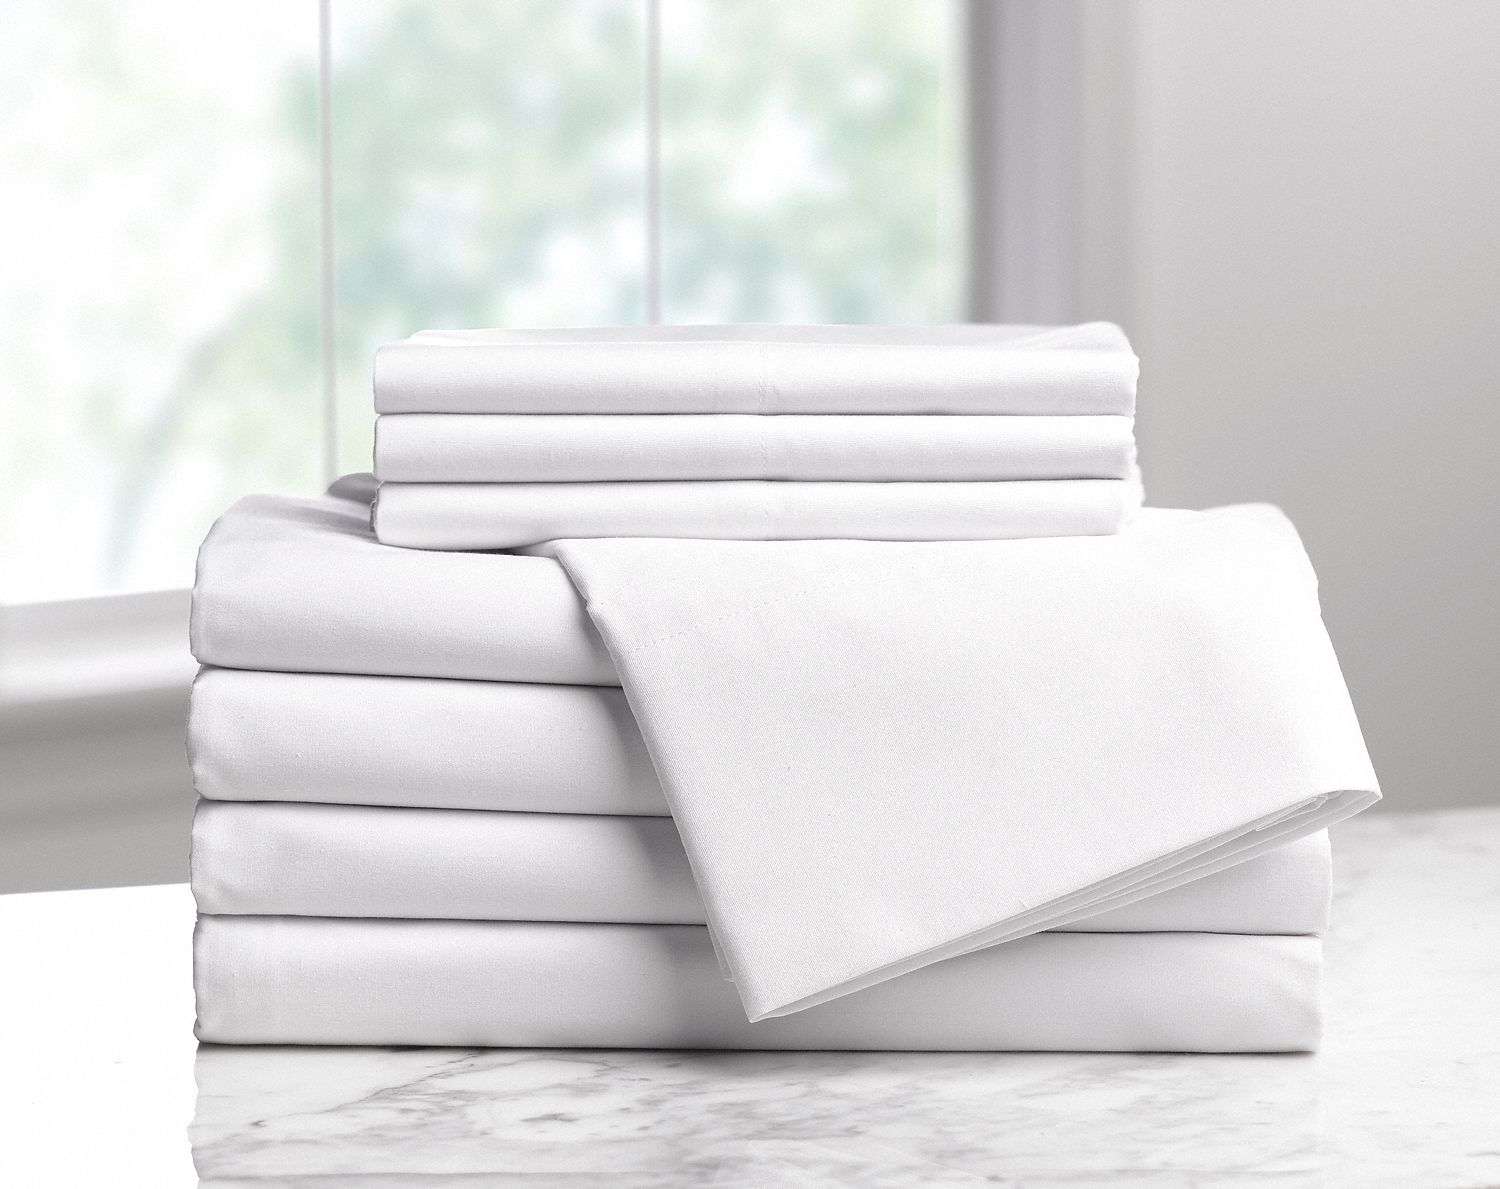 Blanket: Twin, White, 68 in Wd, 94 in Lg, Polyester, 4 PK